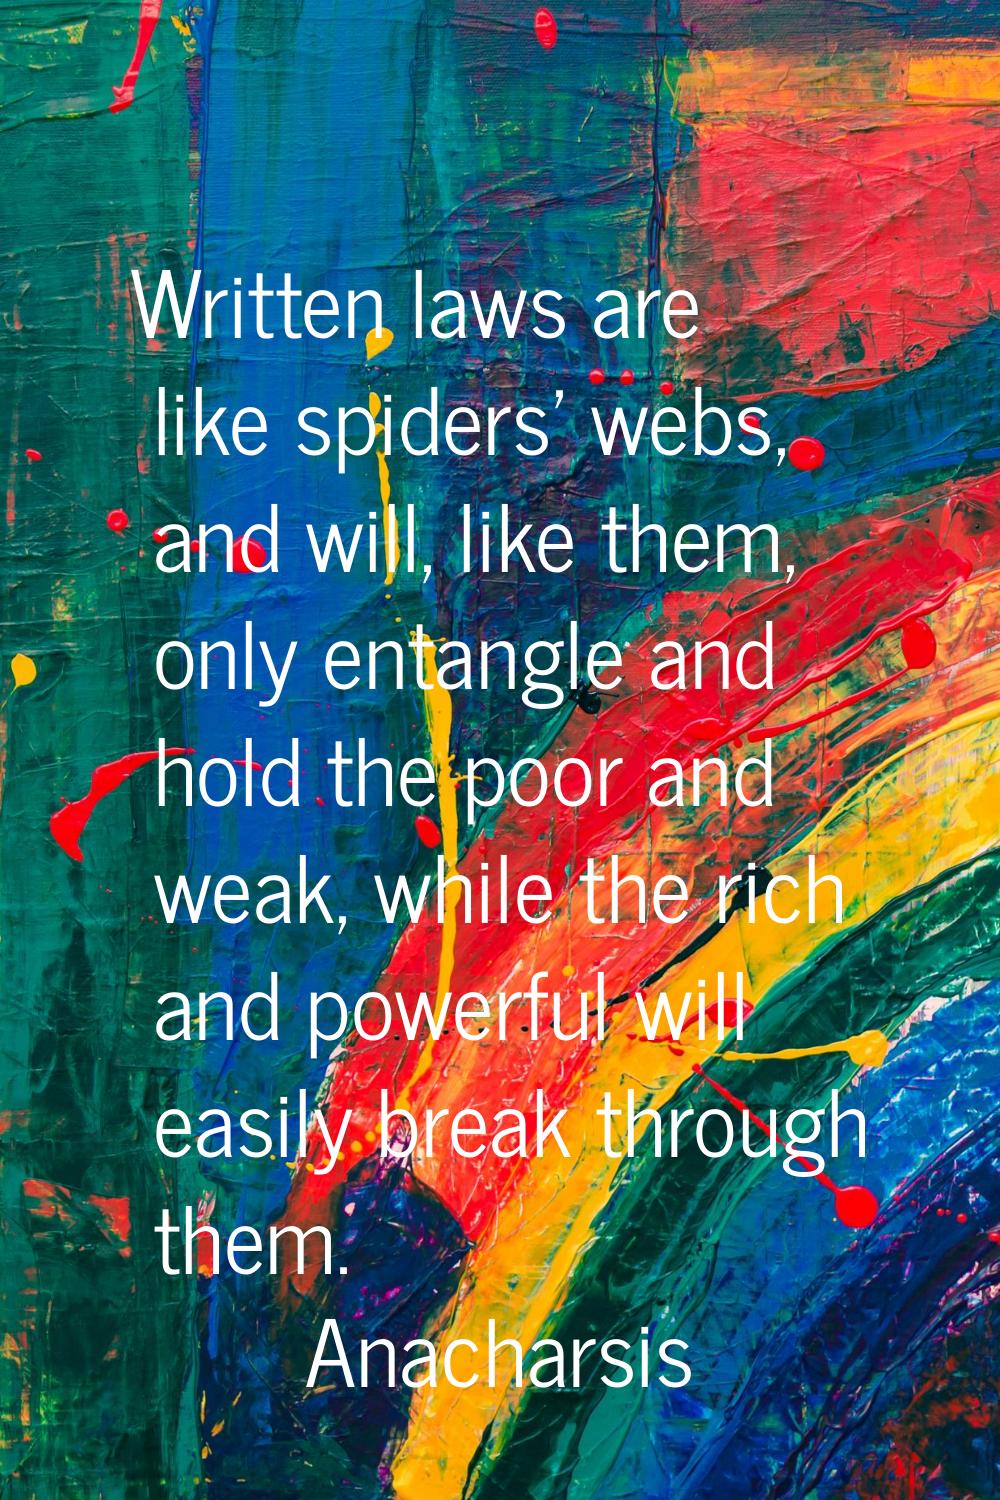 Written laws are like spiders' webs, and will, like them, only entangle and hold the poor and weak,